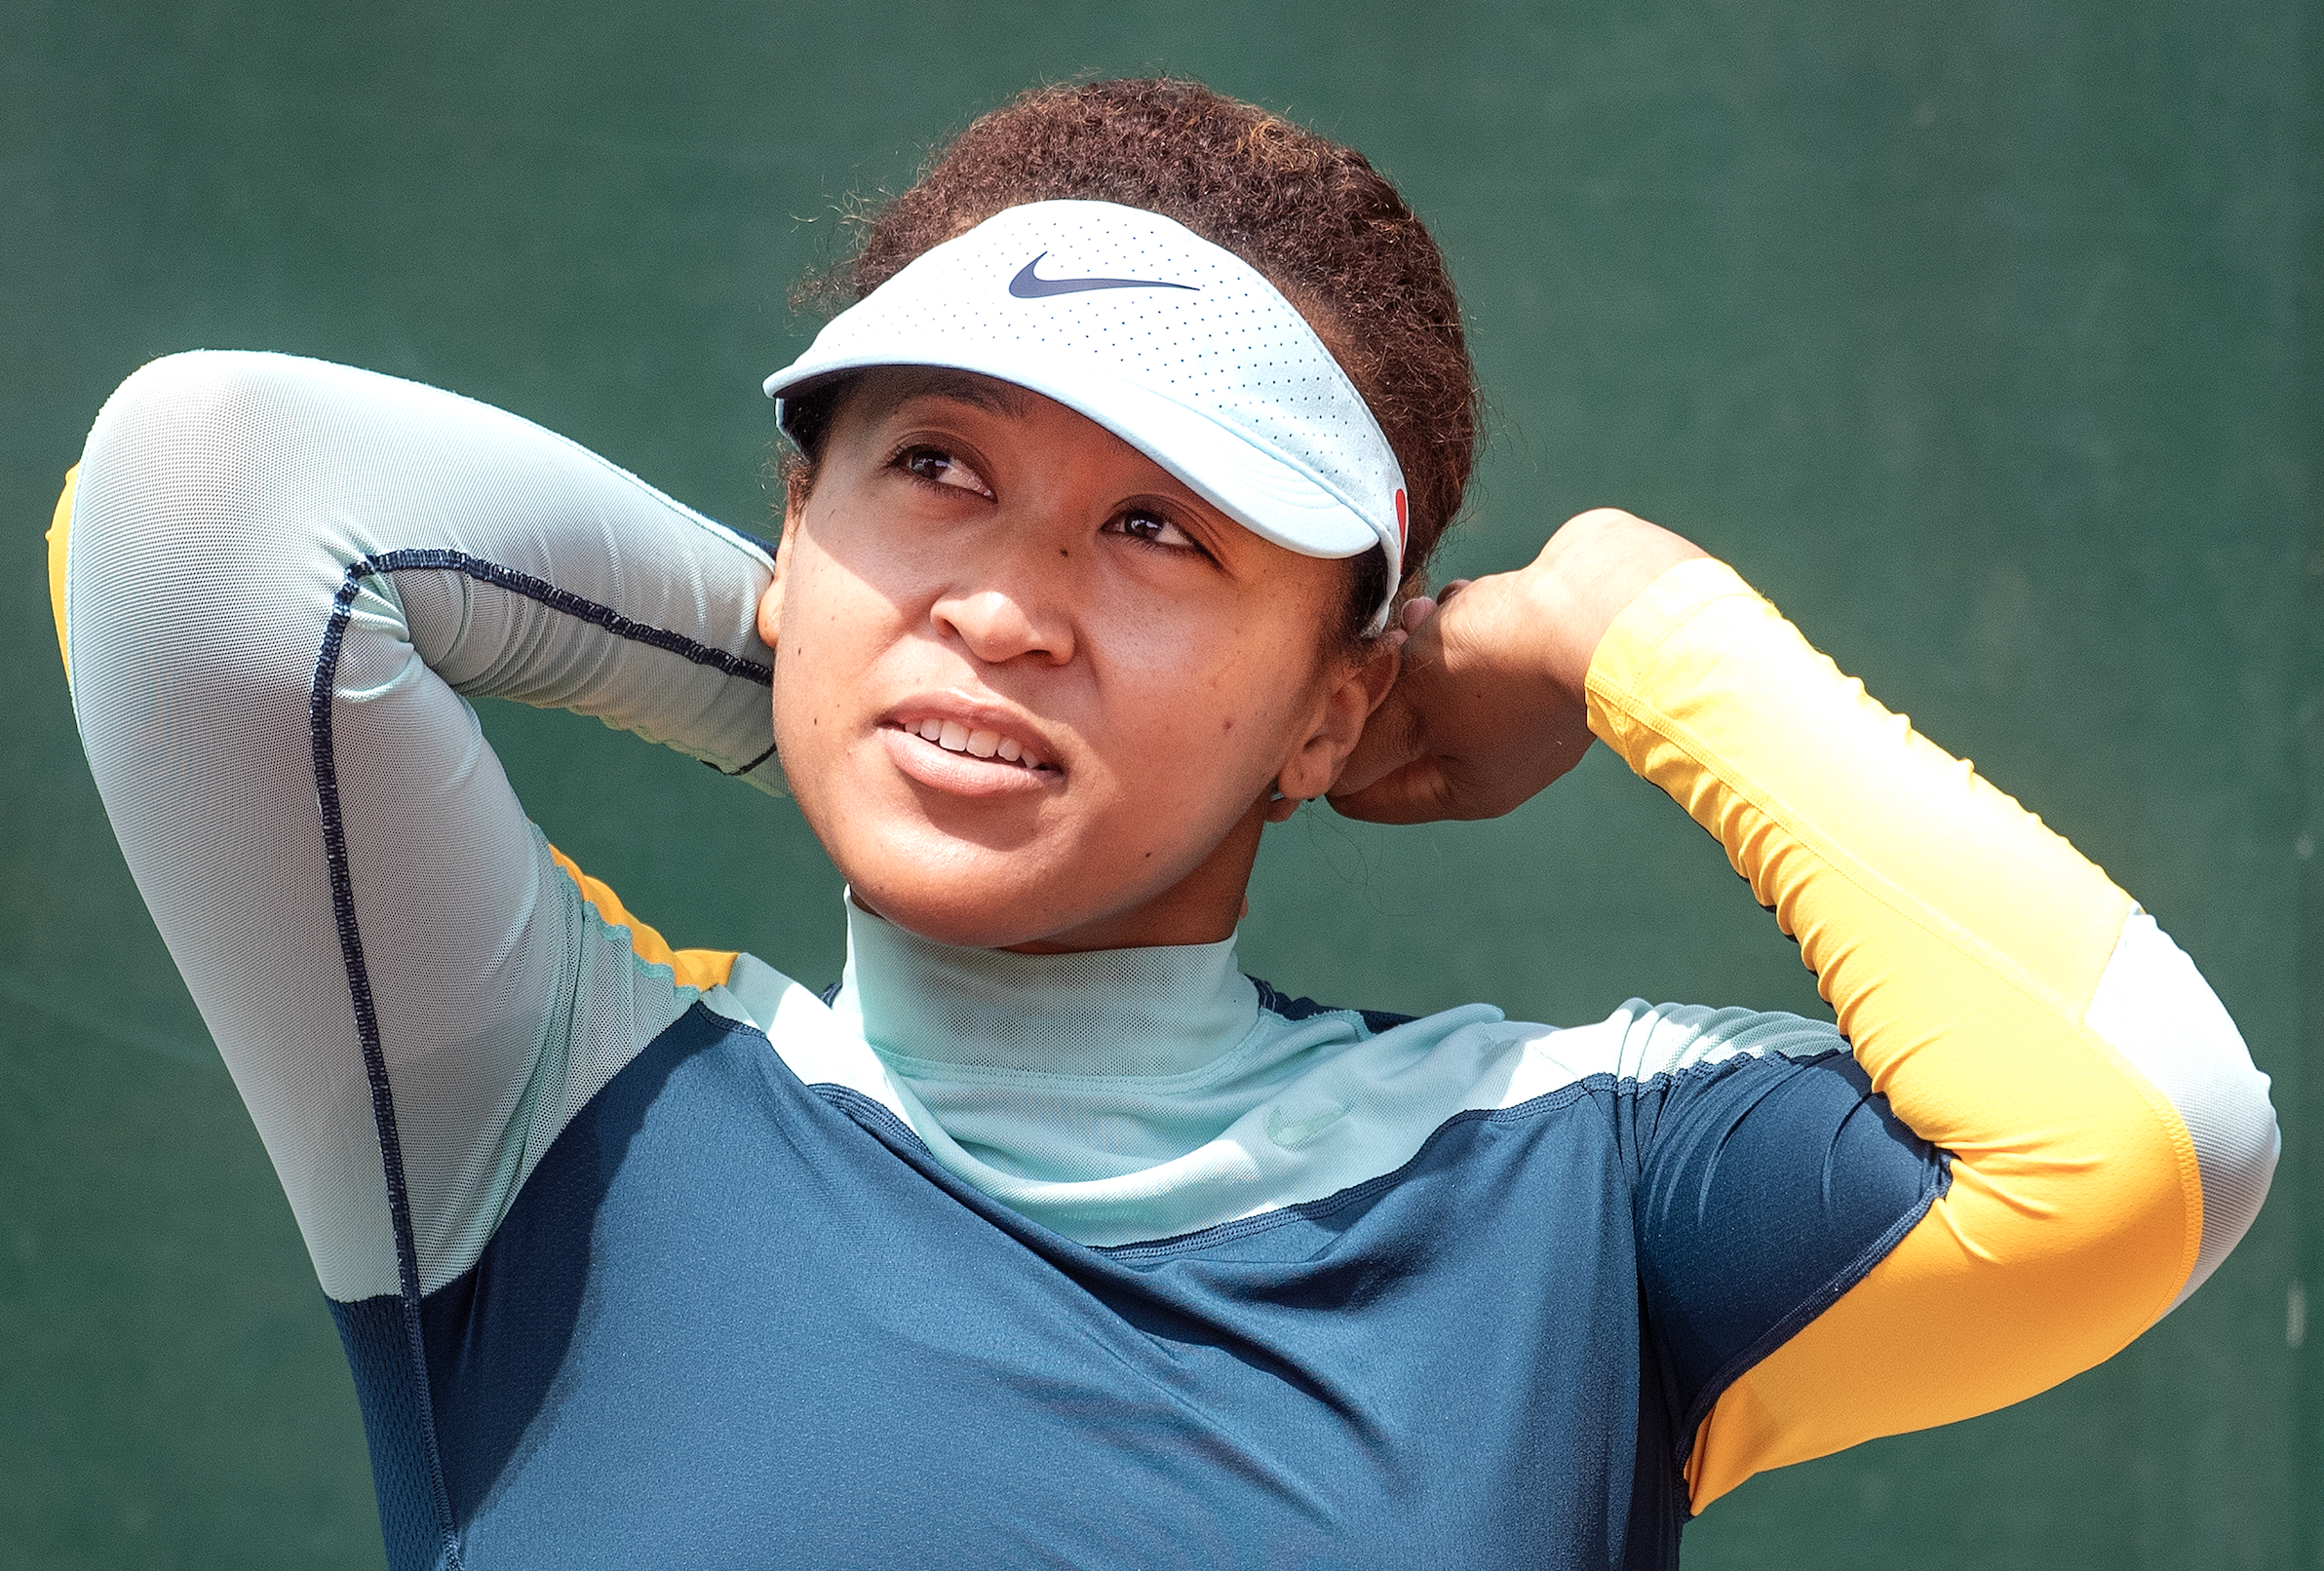 Opinion: Naomi Osaka Doesn’t Have To Engage With Racist Trolls